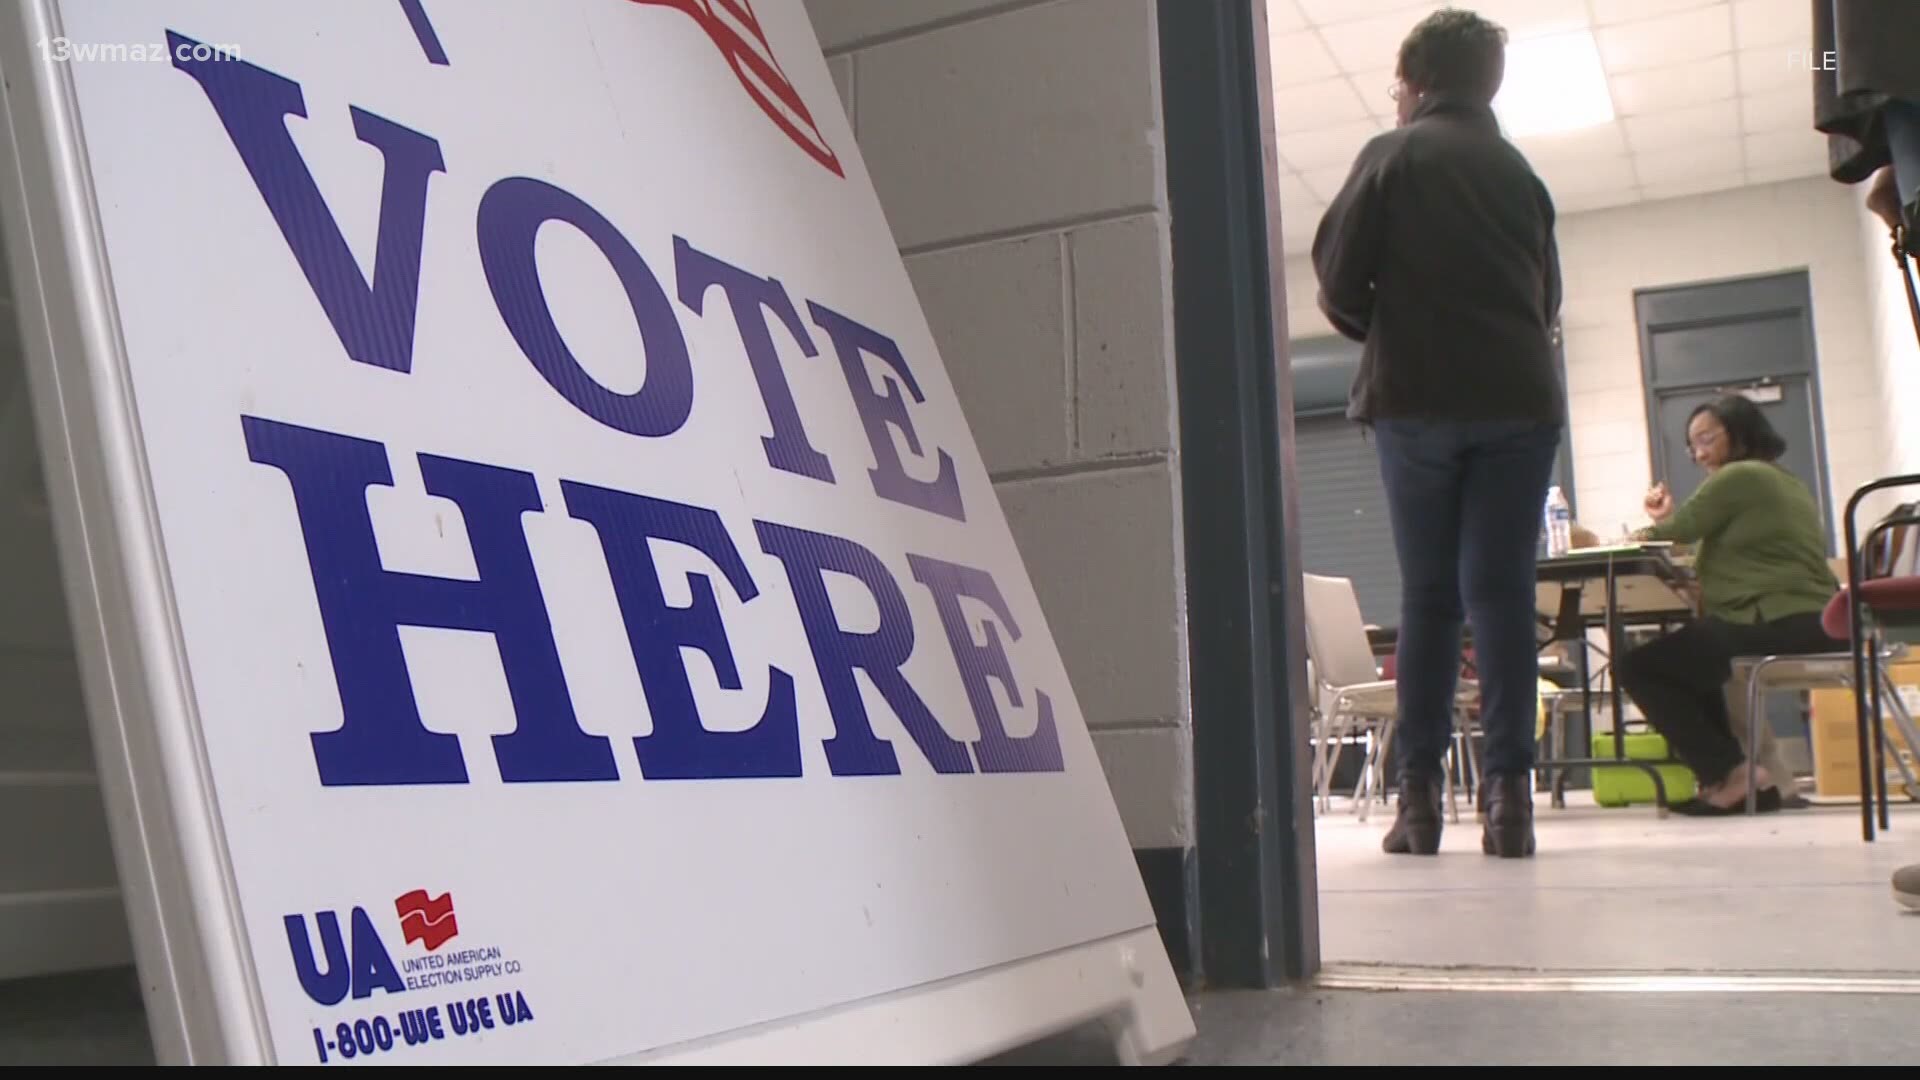 You have until Monday to register to vote in the January runoff, and board of elections officials say they're working to make sure no laws are broken.